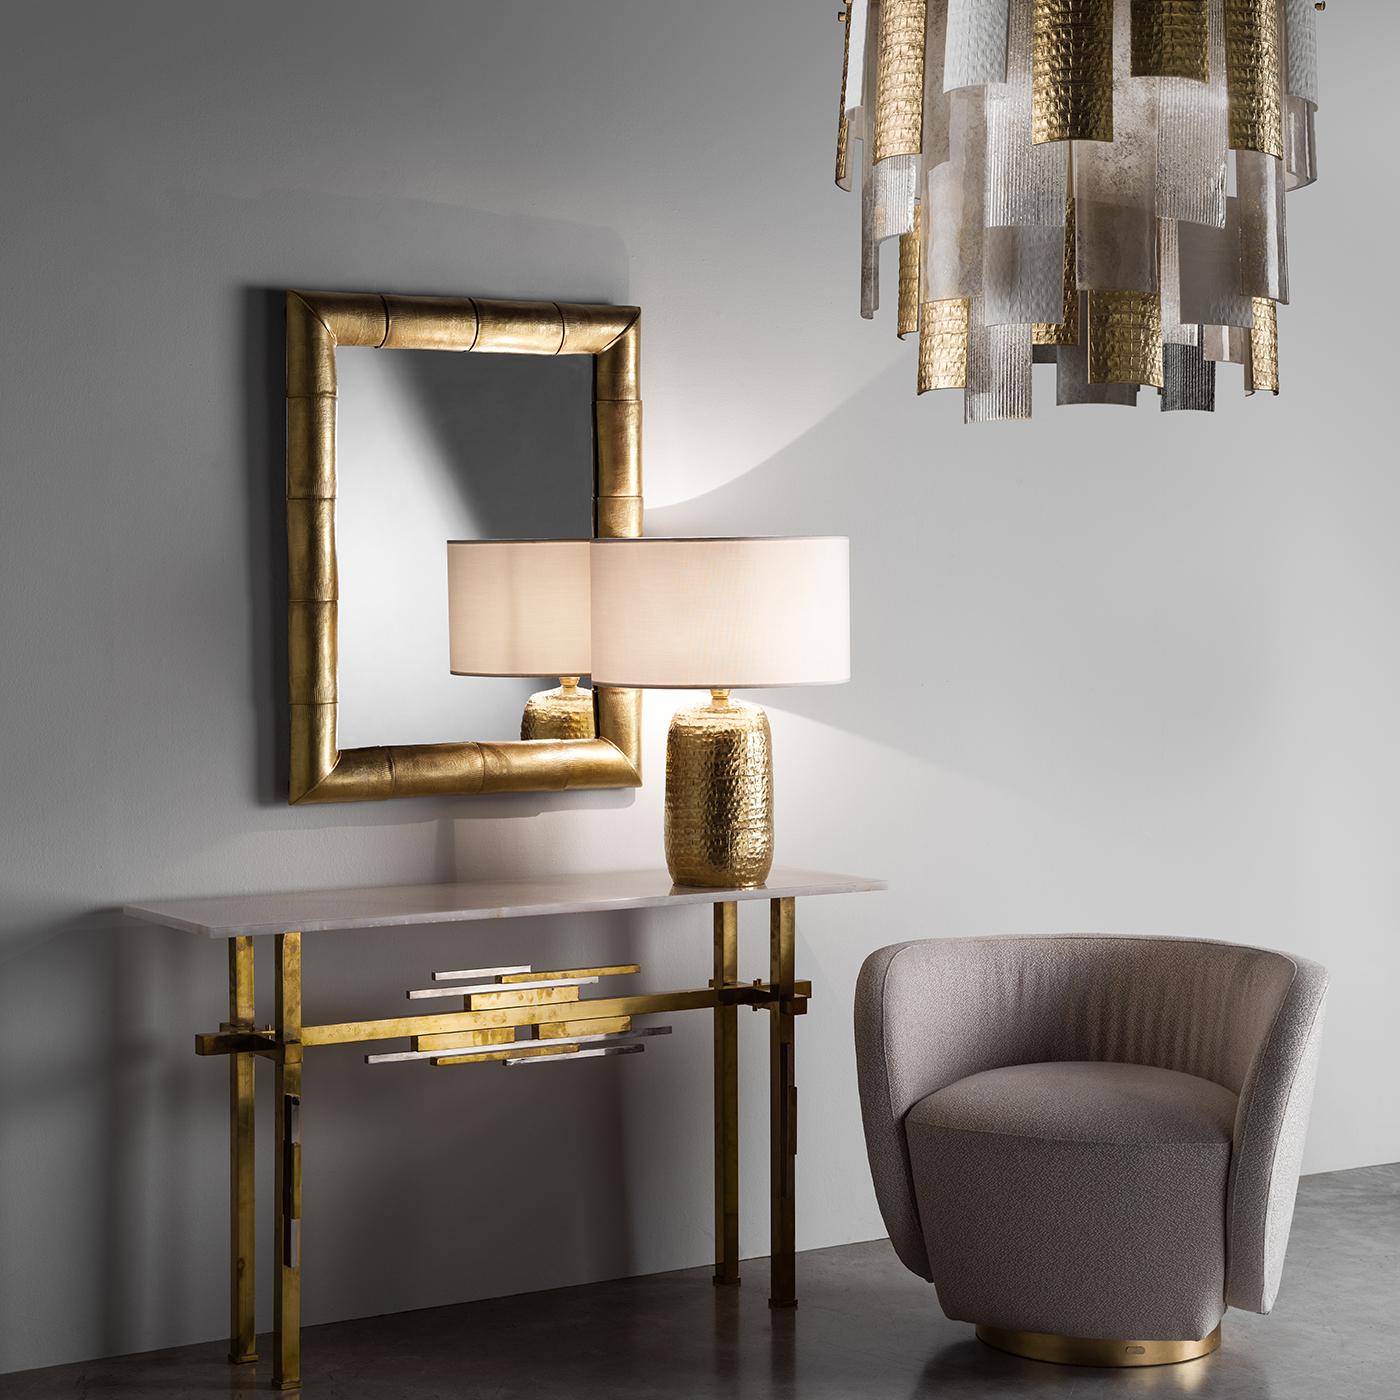 Metal with a brass finish and mouth-blown glass create a stunning chandelier of strong visual impact that exudes sophistication and modern allure. The structure features several layers of juxtaposed elements, slightly curved to follow the round